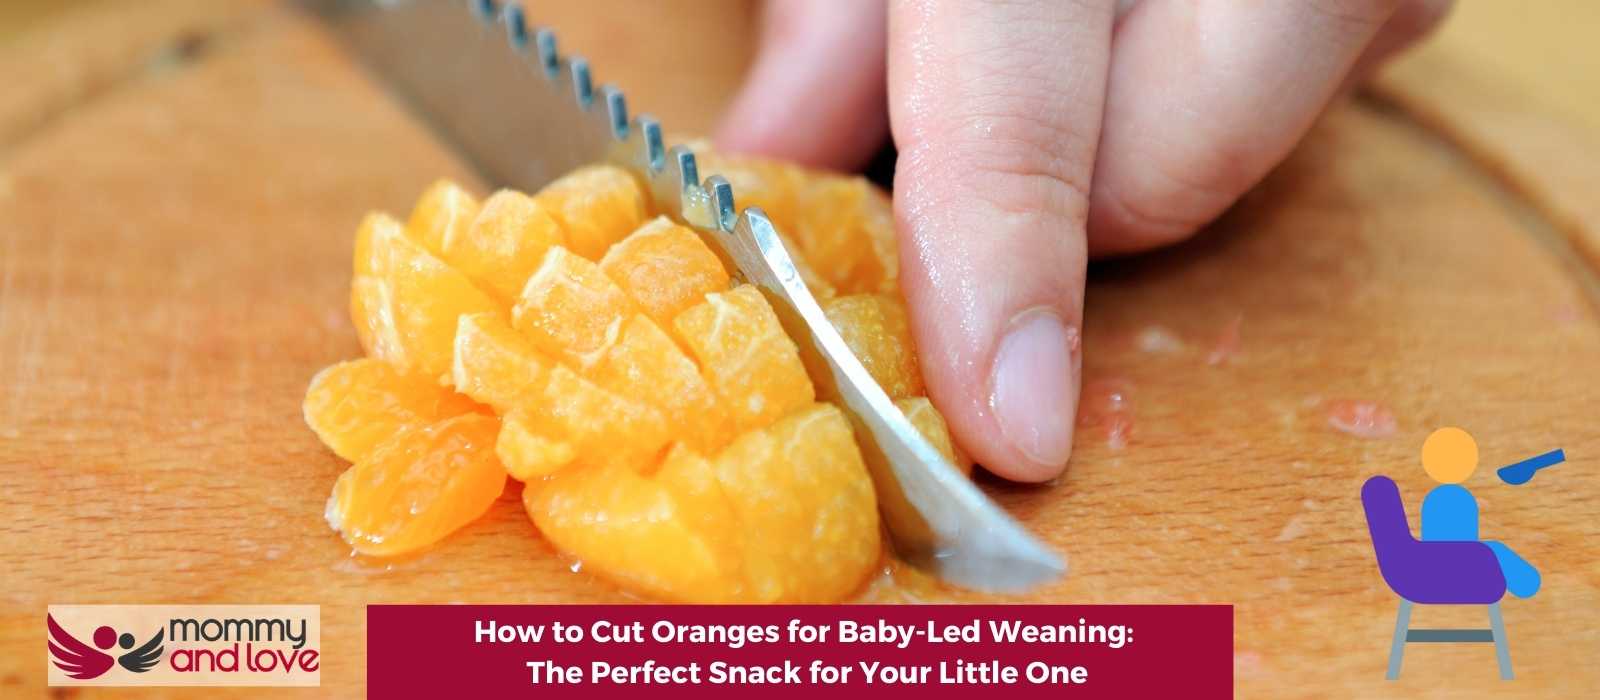 How to Cut Oranges for Baby-Led Weaning The Perfect Snack for Your Little One